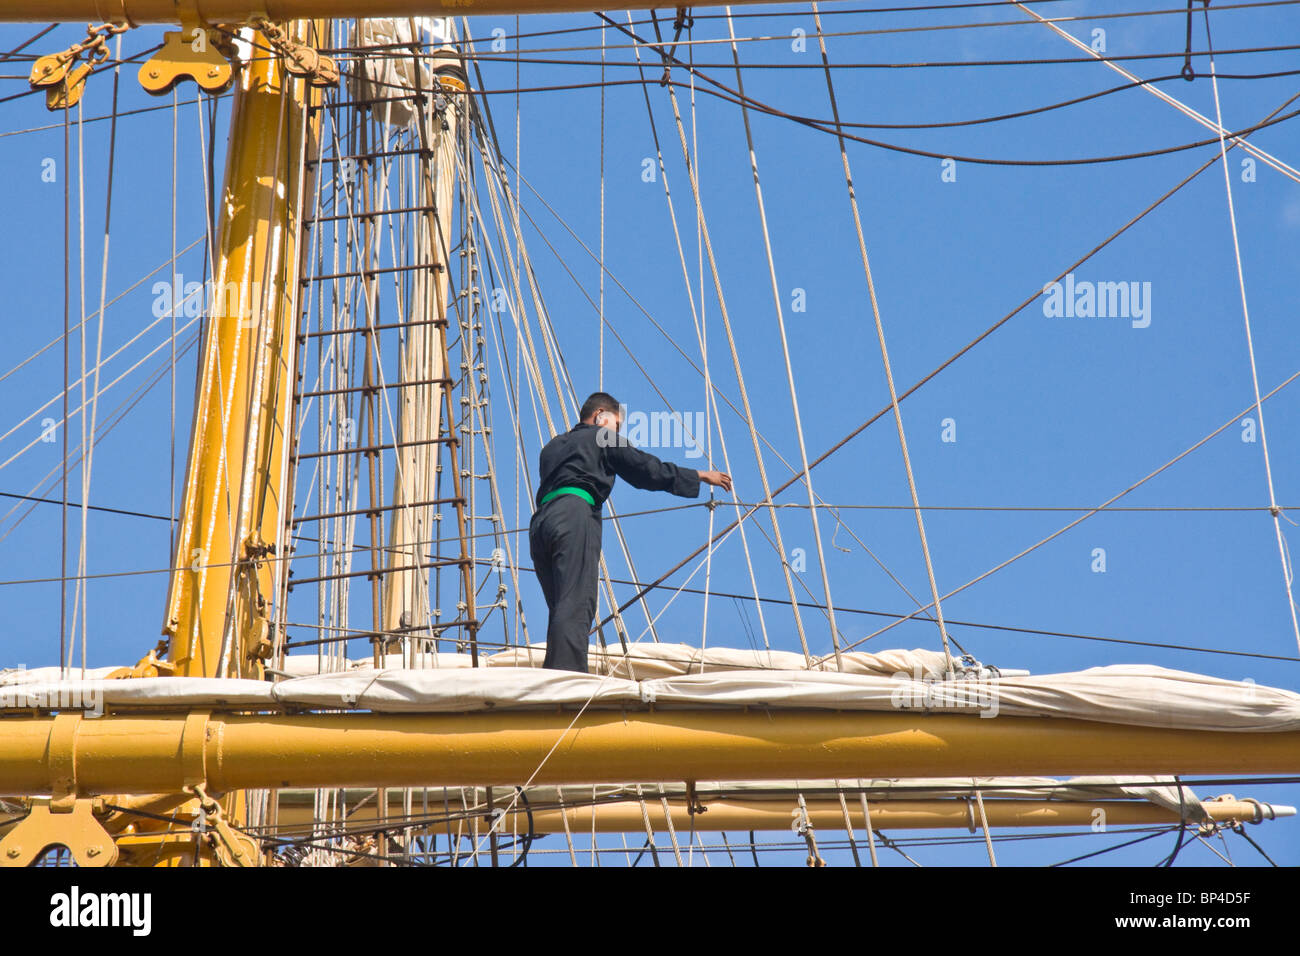 Member of the crew of a barquentine rigged sailing ship working on the middle yard (spar) of the foremast and rigging. Stock Photo